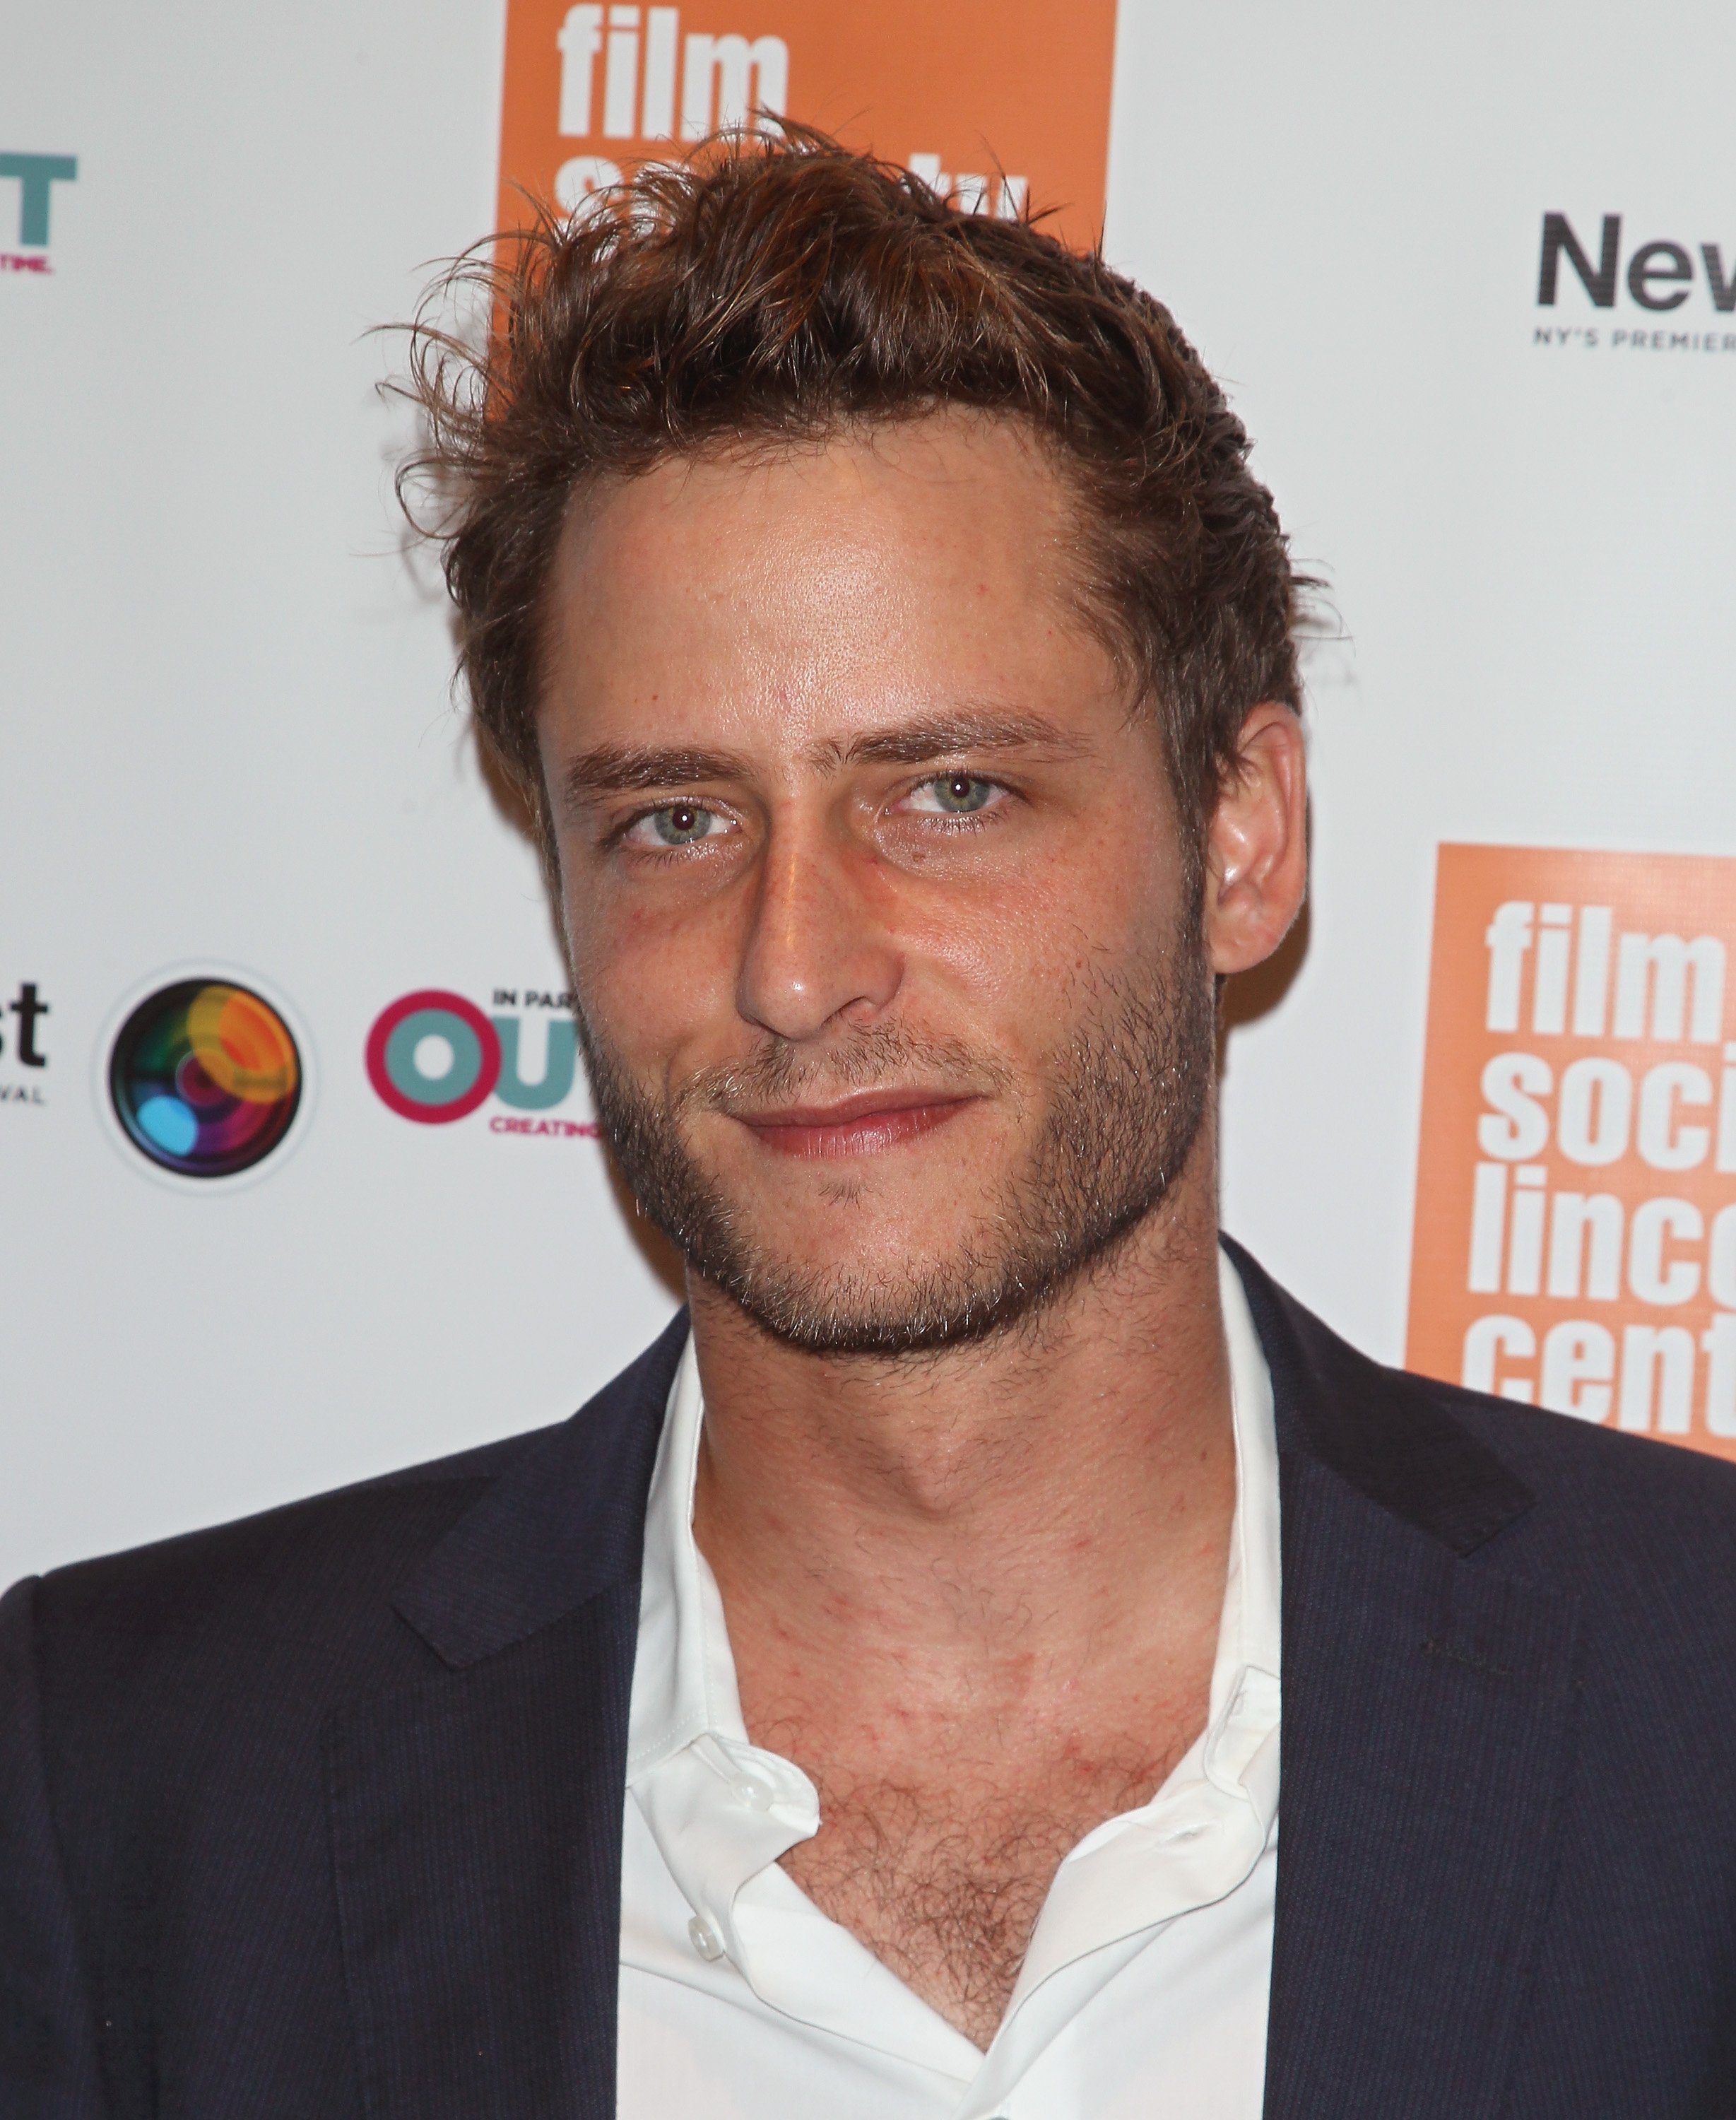 'Shtisel' star Michael Aloni who portrays youngest son Akiva on the hit Netflix series